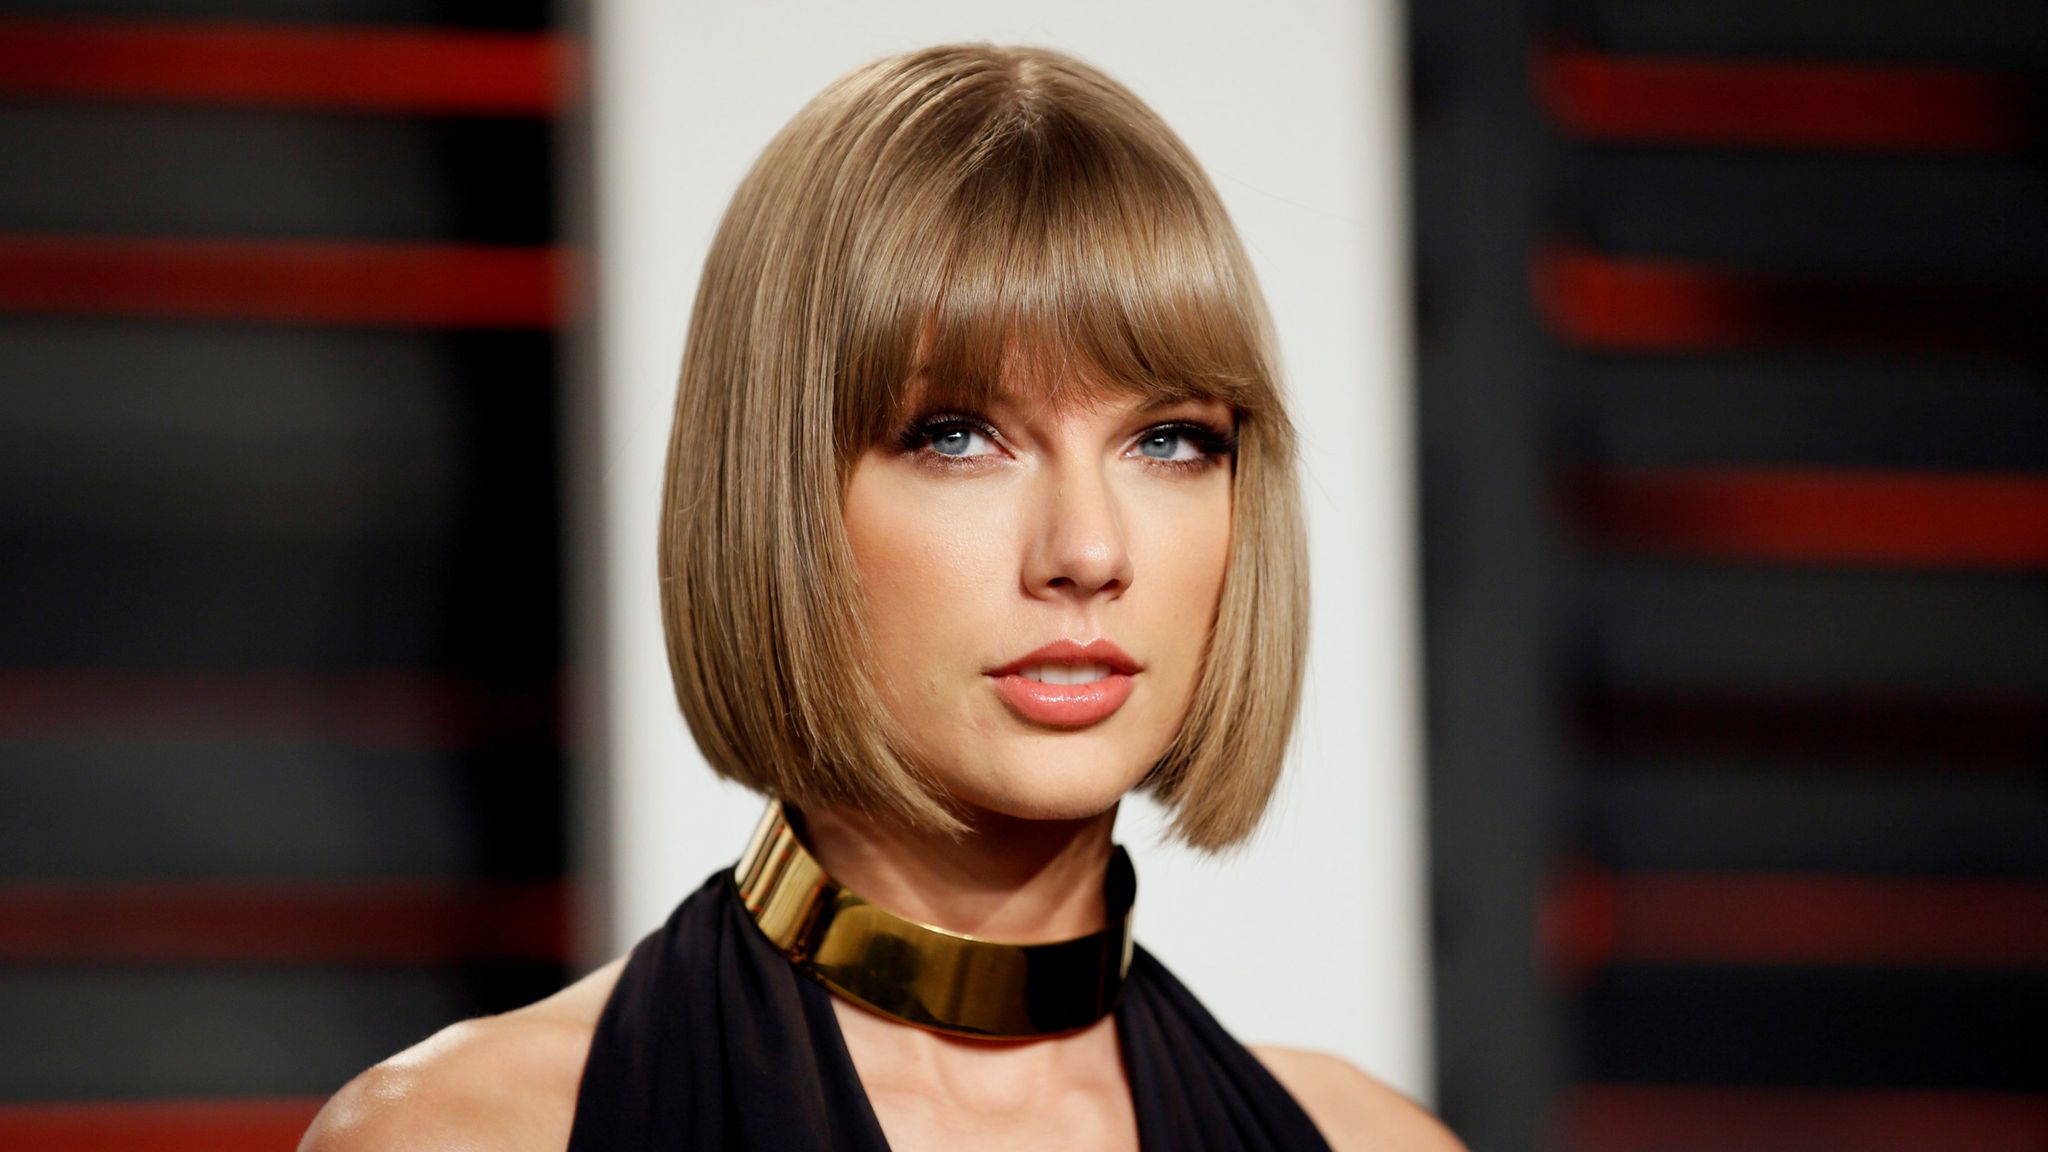 Taylor Swift In Legal Row With Blogger Who Suggested She Encouraged